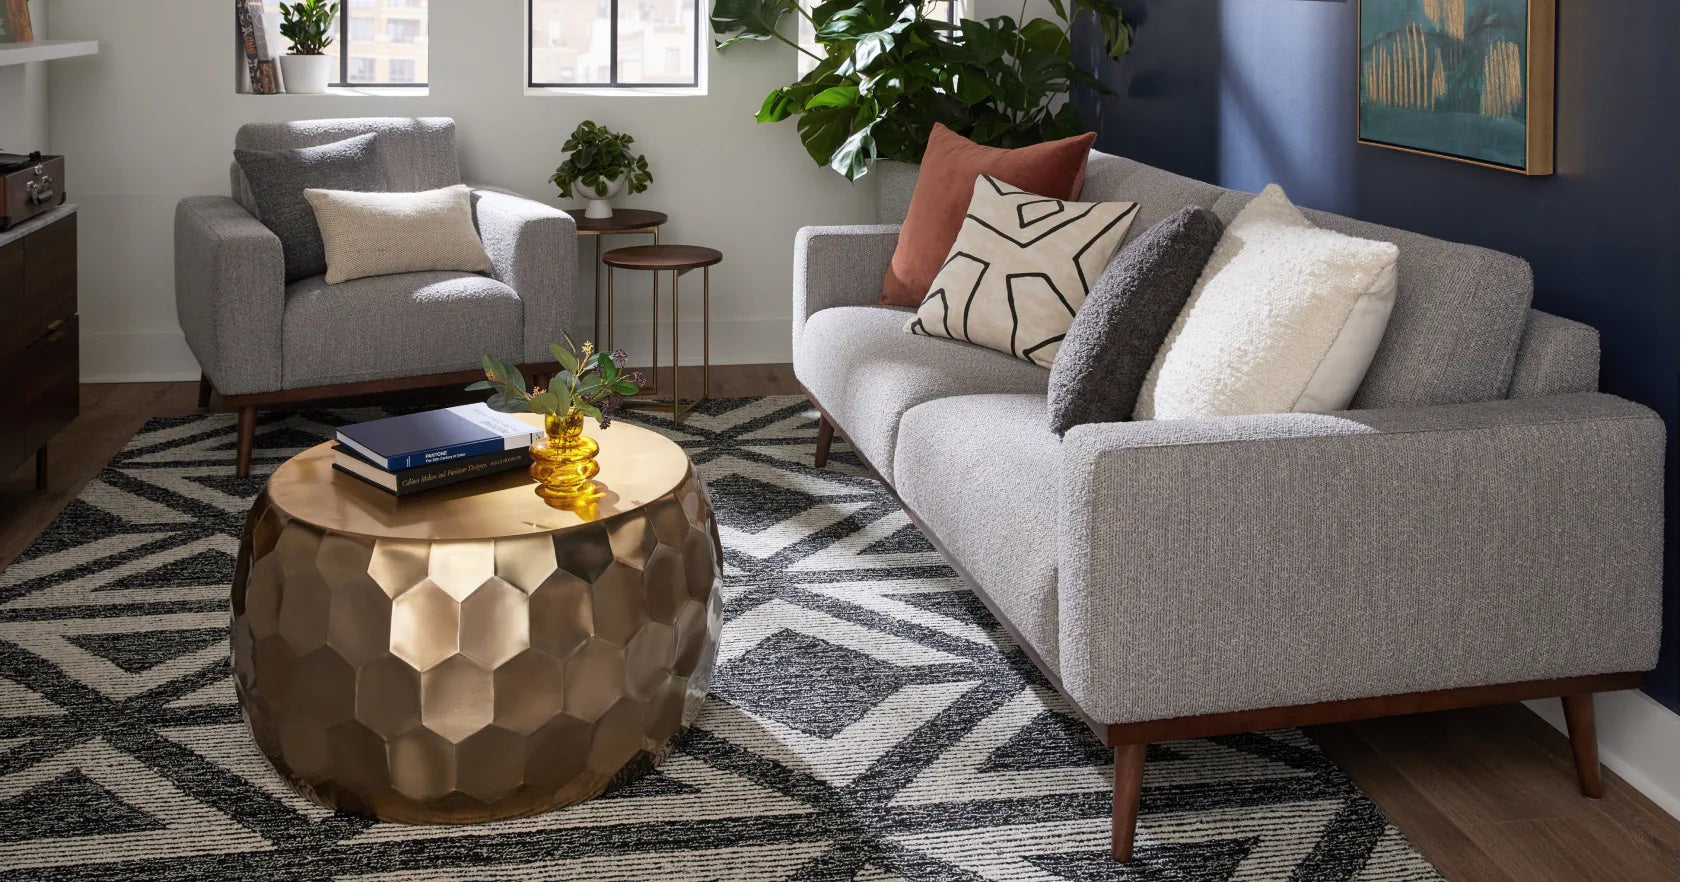 A modern living room with a large window showing a garden view. It features a gray sofa, brown leather armchair, wooden coffee table, and patterned rug. Decor includes a wall art of a cactus, woven baskets, a wooden sideboard, and a pendant light.